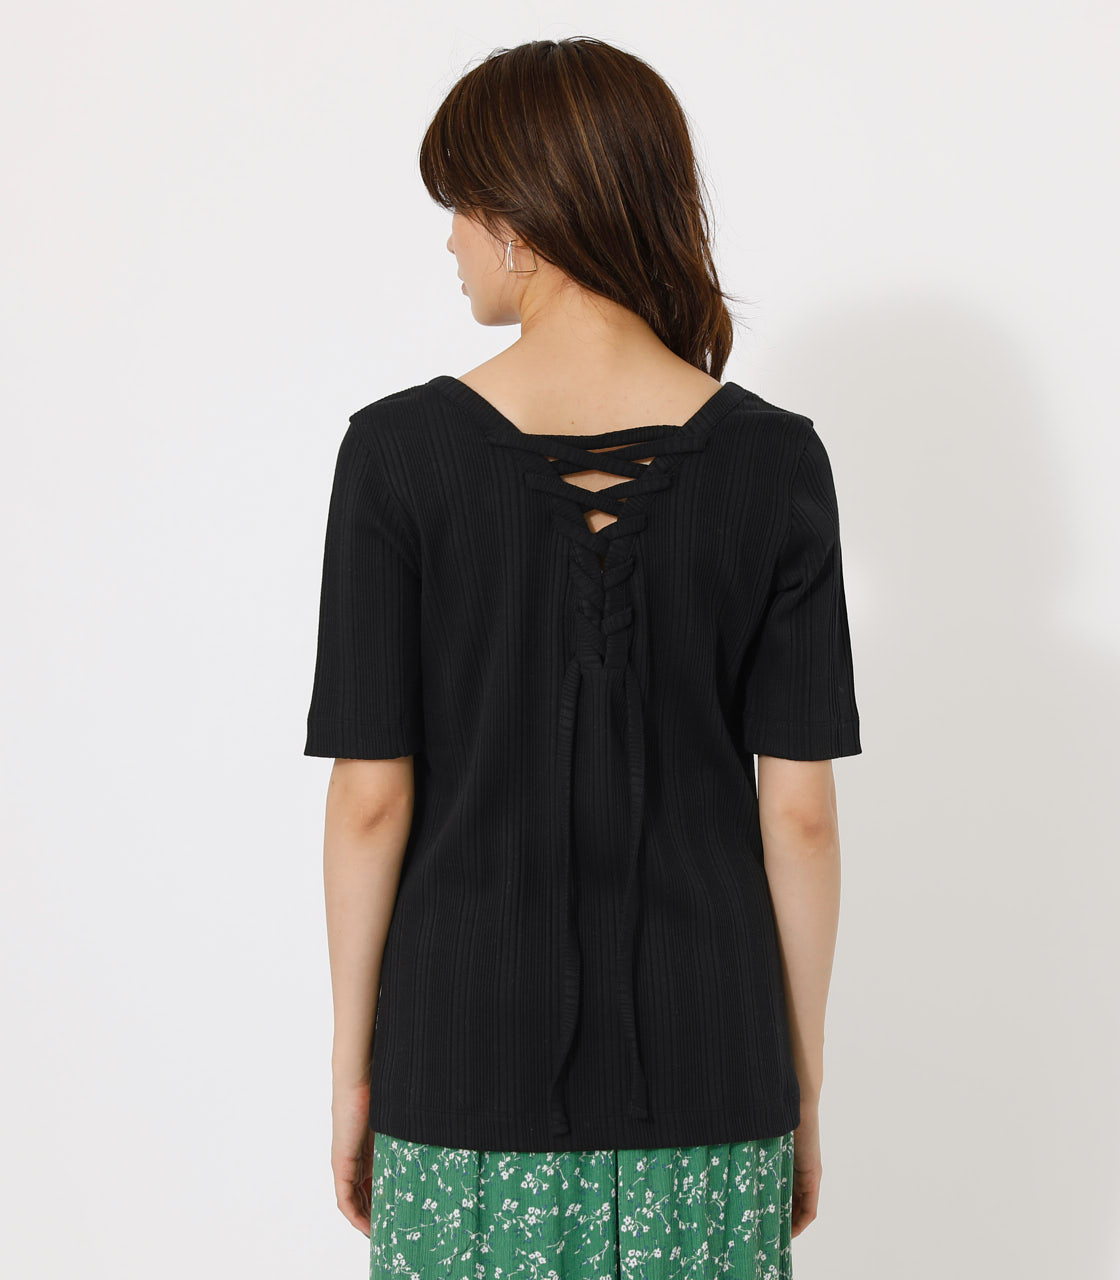 BACK LACE UP TOPS/バックレースアップトップス 詳細画像 BLK 6